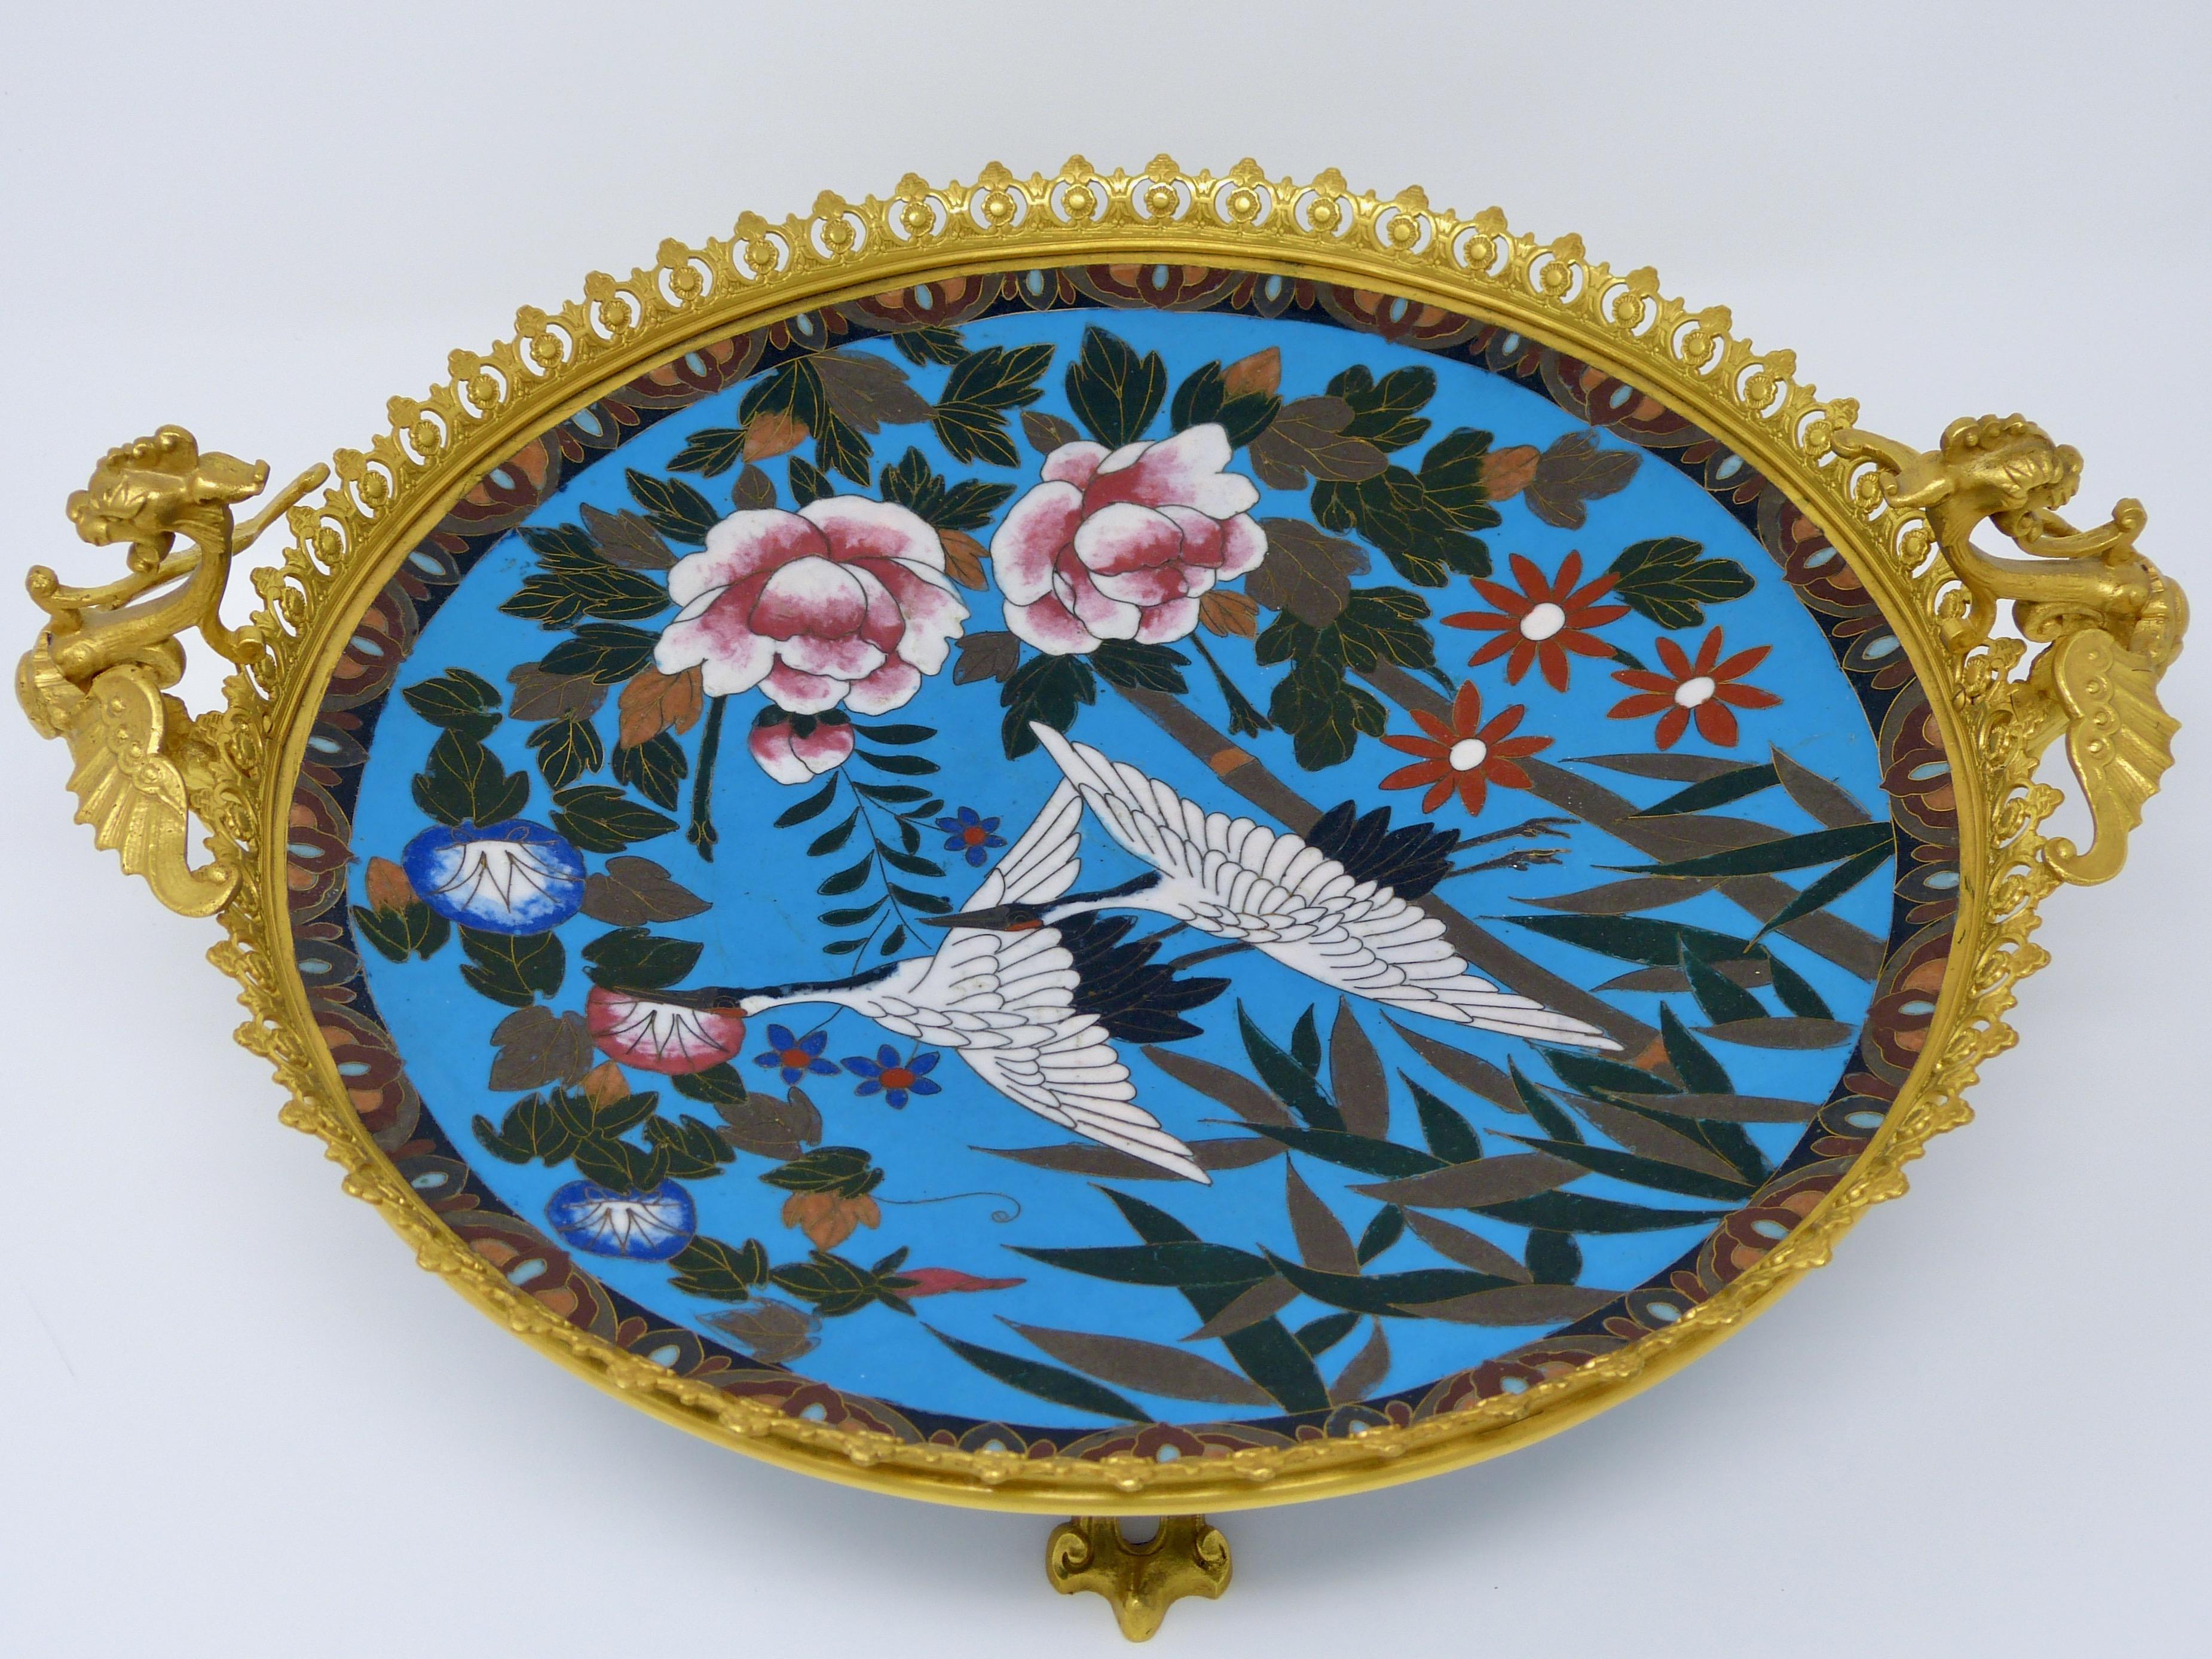 Antique Gilt Bronze and Cloisonné Plate, Japonisme, France, 19th Century In Good Condition For Sale In Torreon, Coahuila